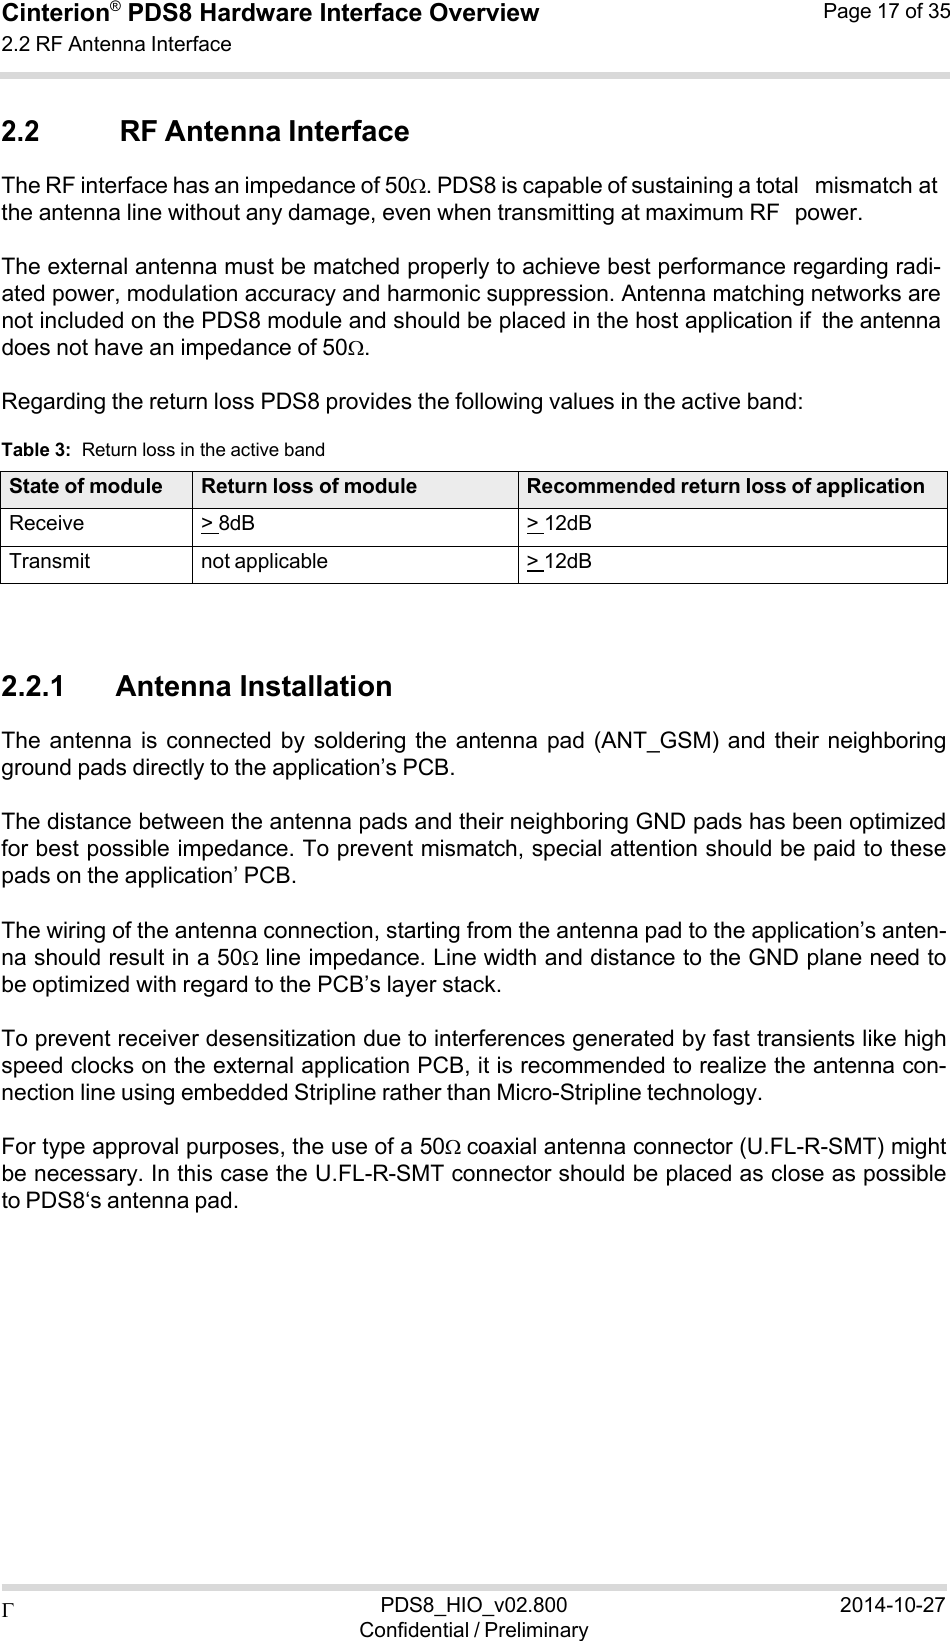  PDS8_HIO_v02.800Confidential / Preliminary2014-10-27Cinterion®  PDS8 Hardware Interface Overview 2.2 RF Antenna Interface Page 17 of 35   2.2 RF Antenna Interface The RF interface has an impedance of 50. PDS8 is capable of sustaining a total mismatch at the antenna line without any damage, even when transmitting at maximum RF power.  The external antenna must be matched properly to achieve best performance regarding radi- ated power, modulation accuracy and harmonic suppression. Antenna matching networks are not included on the PDS8 module and should be placed in the host application if the antenna does not have an impedance of 50.  Regarding the return loss PDS8 provides the following values in the active band:  Table 3:  Return loss in the active band  State of module Return loss of module Recommended return loss of applicationReceive &gt; 8dB &gt; 12dBTransmit not applicable &gt; 12dB   2.2.1      Antenna Installation The antenna  is connected  by  soldering  the antenna  pad (ANT_GSM)  and their  neighboring ground pads directly to the application’s PCB.  The distance between the antenna pads and their neighboring GND pads has been optimized for best possible impedance. To prevent mismatch, special attention should be paid to these pads on the application’ PCB.  The wiring of the antenna connection, starting from the antenna pad to the application’s anten- na should result in a 50 line impedance. Line width and distance to the GND plane need to be optimized with regard to the PCB’s layer stack.  To prevent receiver desensitization due to interferences generated by fast transients like high speed clocks on the external application PCB, it is recommended to realize the antenna con- nection line using embedded Stripline rather than Micro-Stripline technology.  For type approval purposes, the use of a 50coaxial antenna connector (U.FL-R-SMT) might be necessary. In this case the U.FL-R-SMT connector should be placed as close as possible to PDS8‘s antenna pad. 